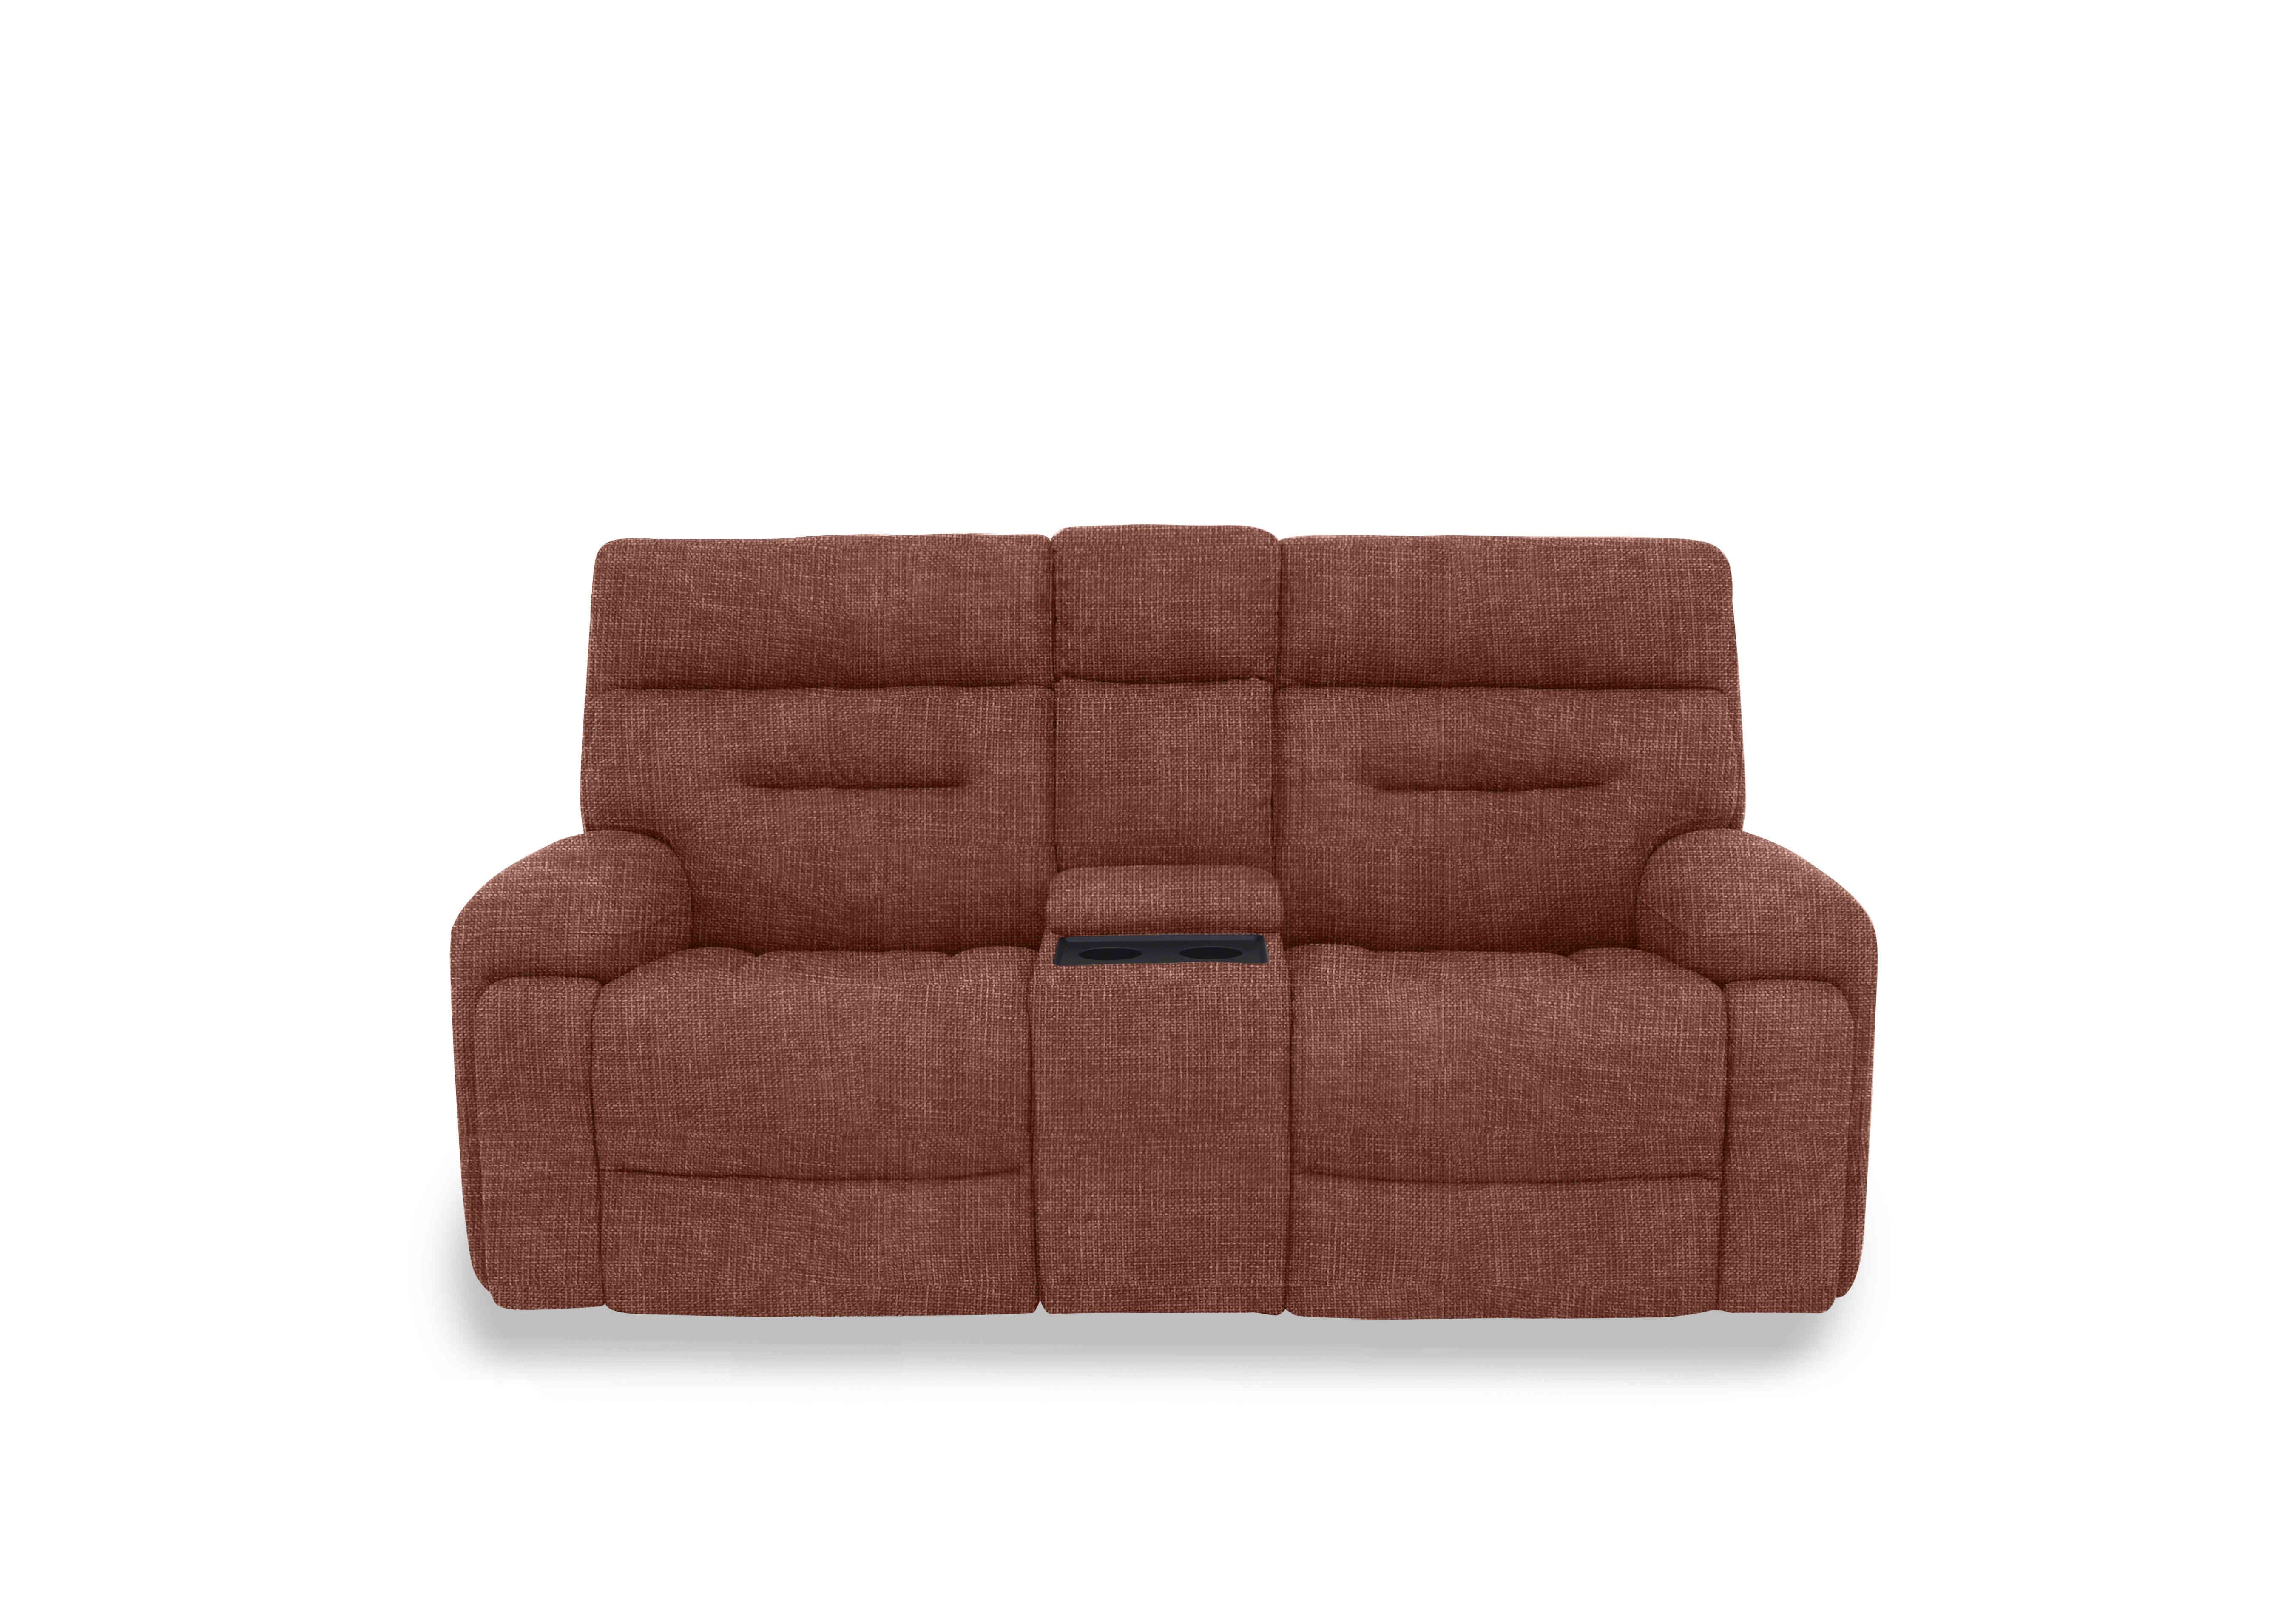 Cinemax Media 2 Seater Fabric Power Recliner Sofa with Power Headrests in Hf-0105 Halifax Red Maple on Furniture Village